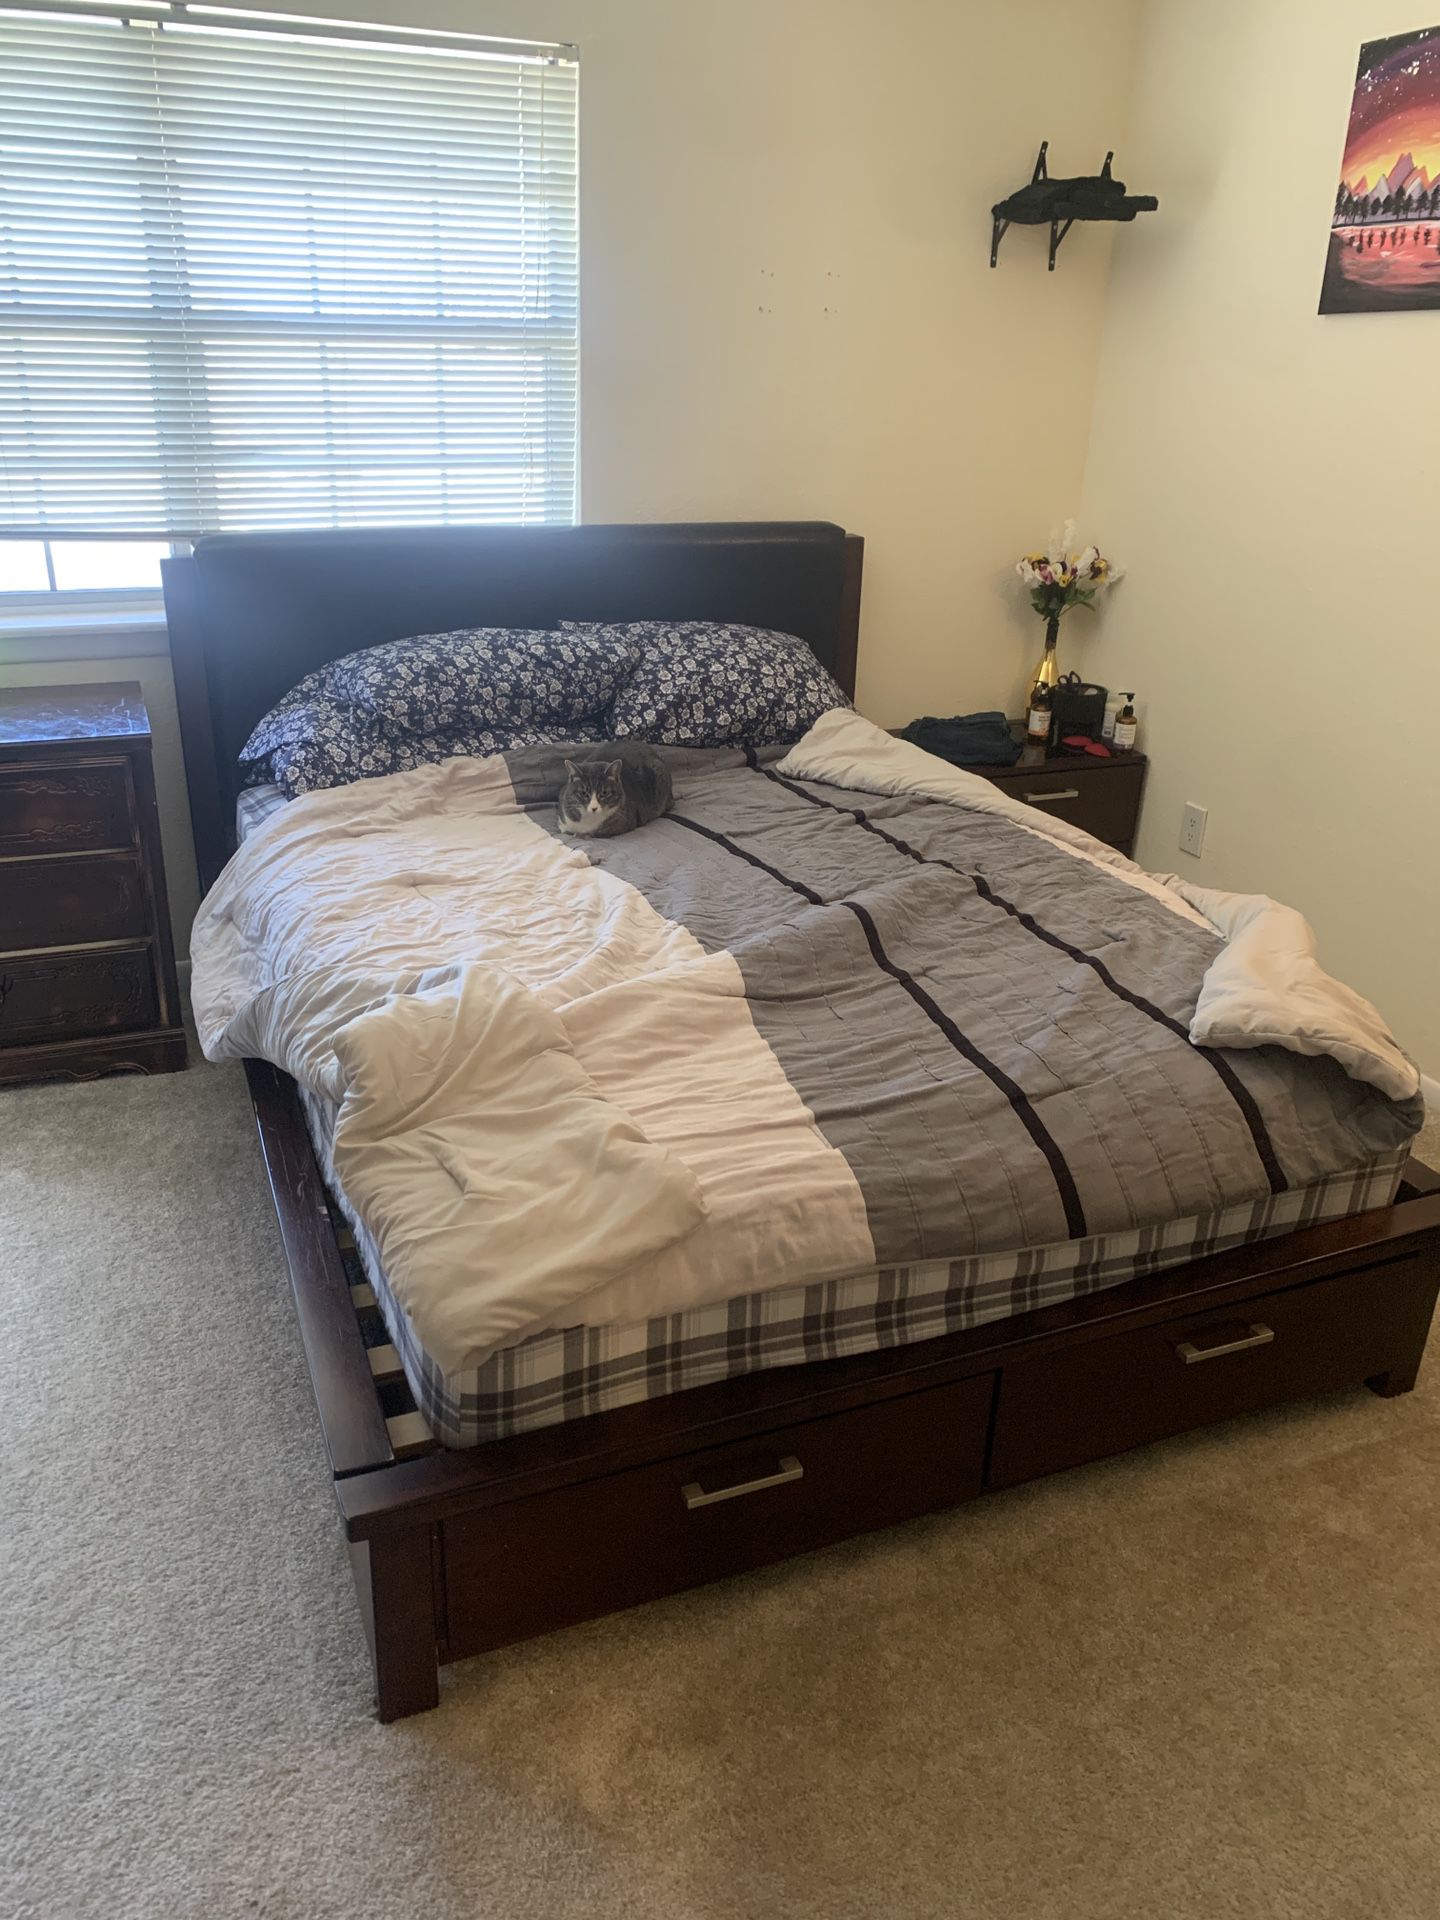 Queen Bed Frame (mattress and comforter not included)